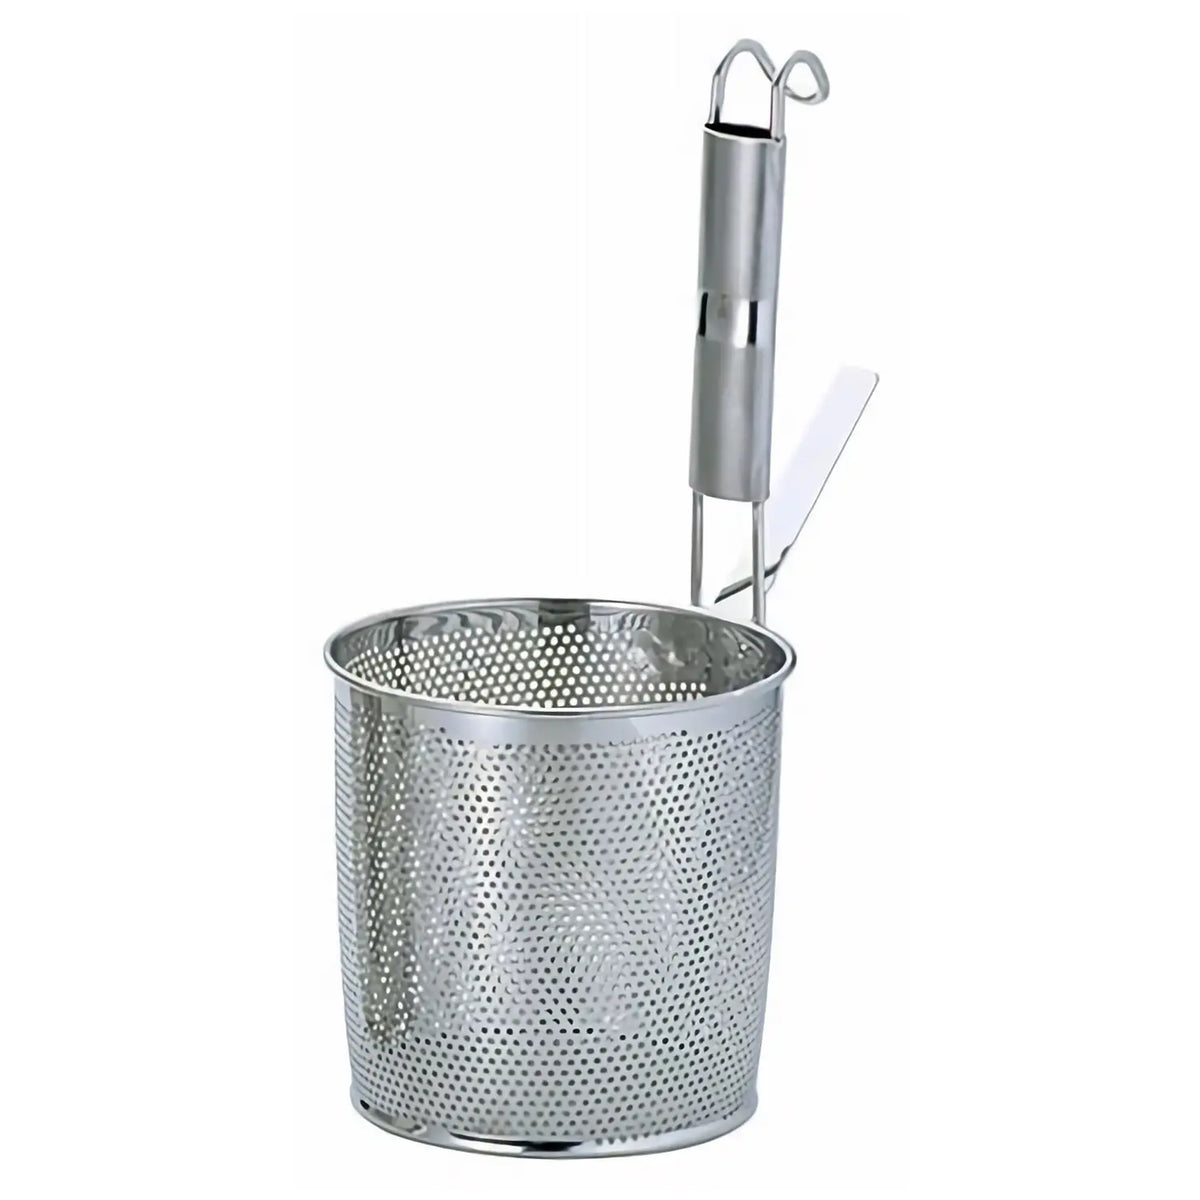 YUKIWA Eco Clean Stainless Steel Perforated Tebo Noodle Strainer Flat Base with Metal Handle